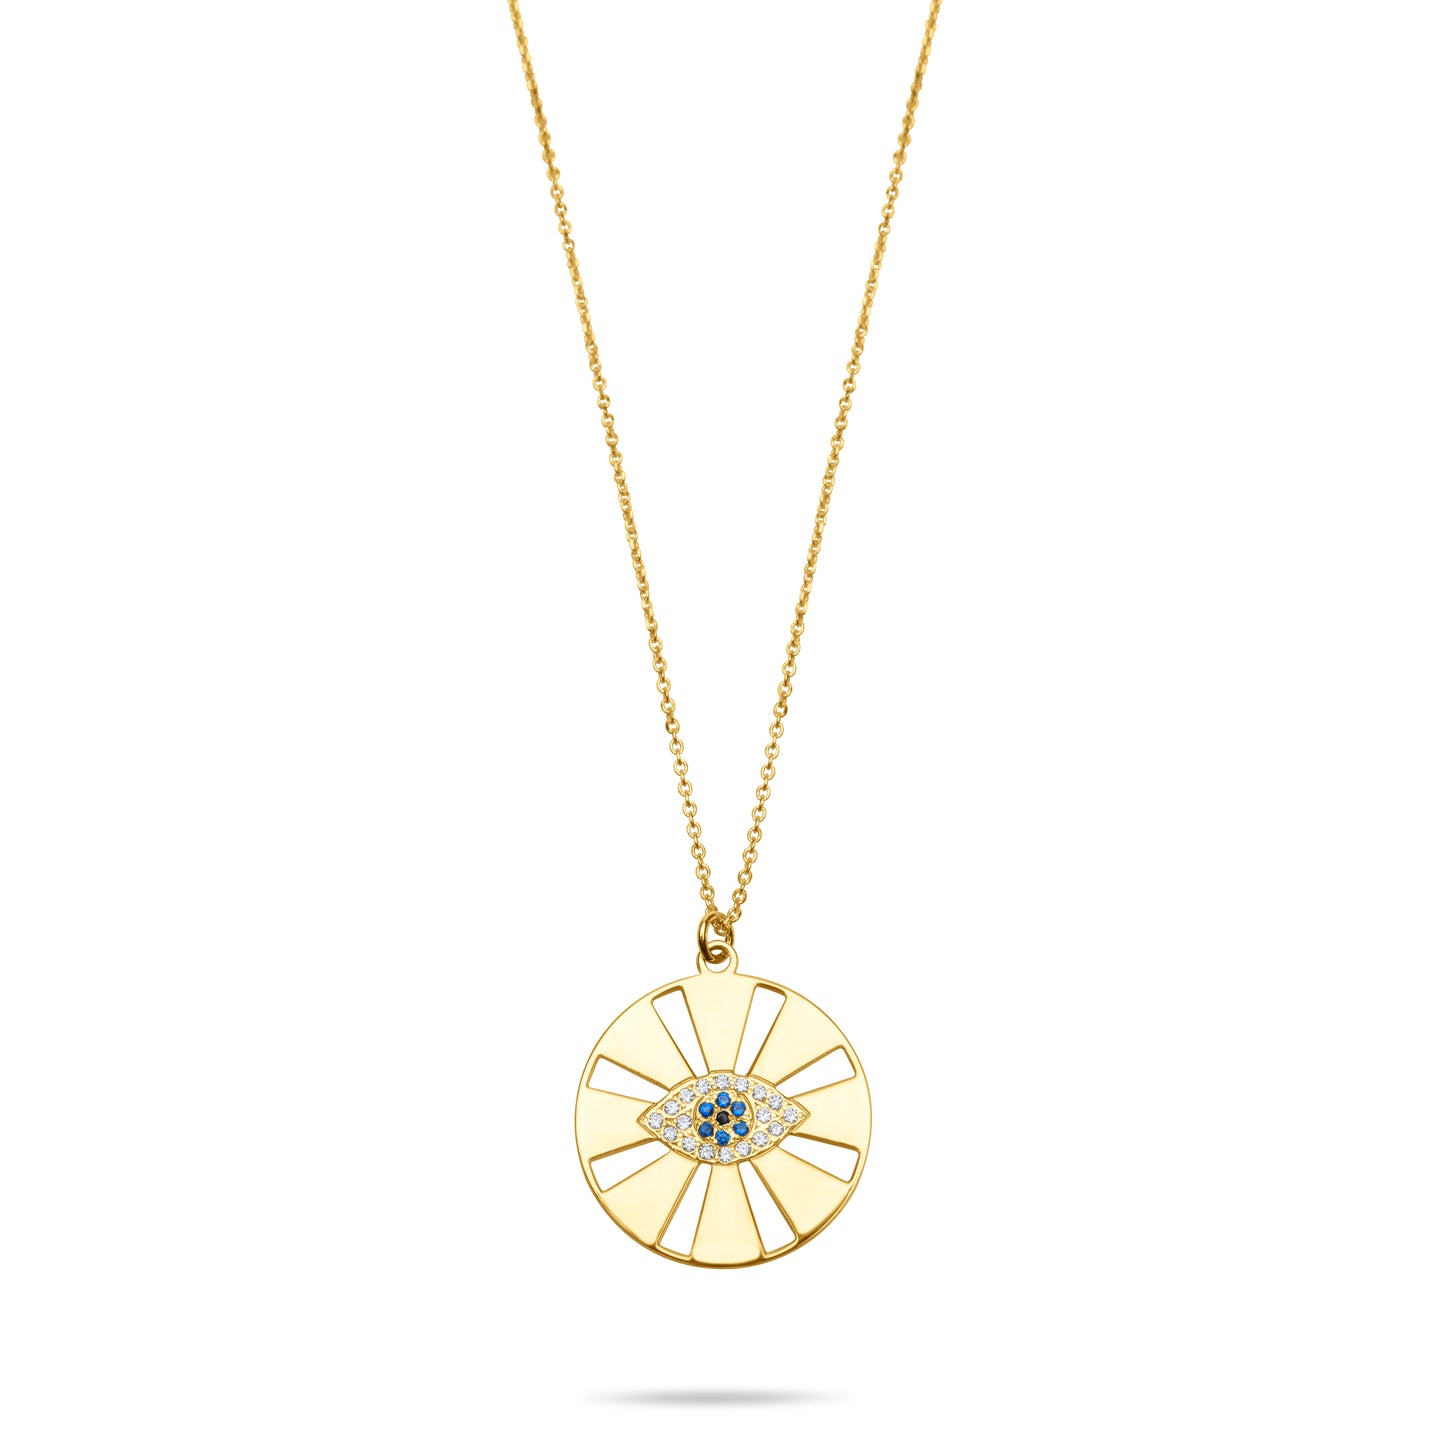 Eye Rays Necklace - Gold Plated